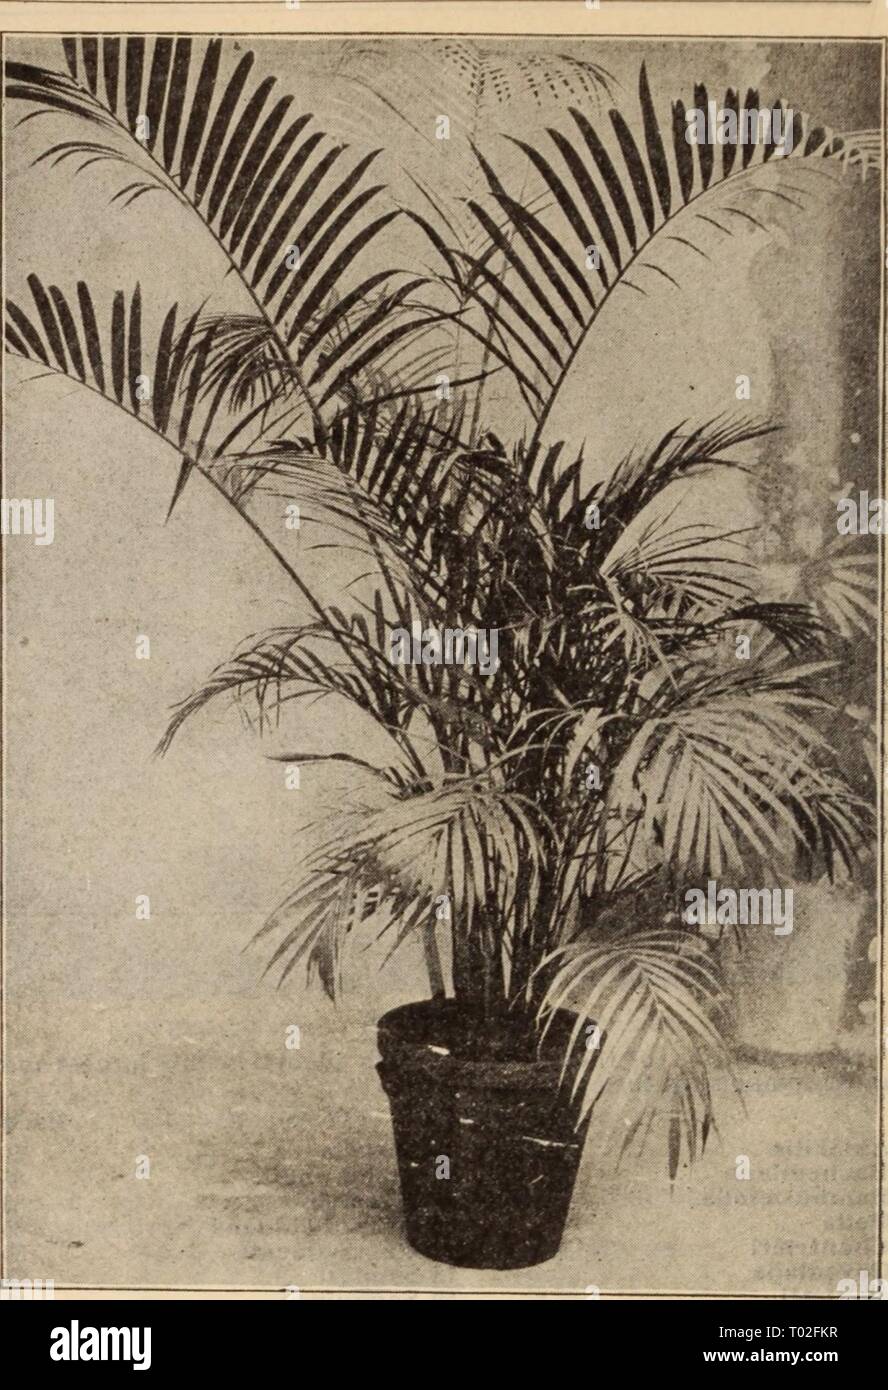 Dreer's wholesale price list / Henry A. Dreer. . dreerswholesalep1912dree Year:   COCOS WEDDELIANA ARECA LUTESCENS Caryota Blancoii. A rare variety of the Fish-tail Palm. 3-inch pots, $1.50 per doz.; $10.00 per 100. Caryota Urens. 2Vi-inch pots, $1.25 per doz.; $8.00 per 100. Chama&dora Elegans. 3-inch pots, $1.50 per doz.; $10.00 per 100. Cocos Flexuosus and Plumosus. Extensively used in parts of California and Louisiana for out-door planting, and also valuable for decorative purposes. 2-inch pots, $1.50 per doz.; $10.00 per 100. A limited stock of large decorative plants, 7 to 8 feet high, $ Stock Photo